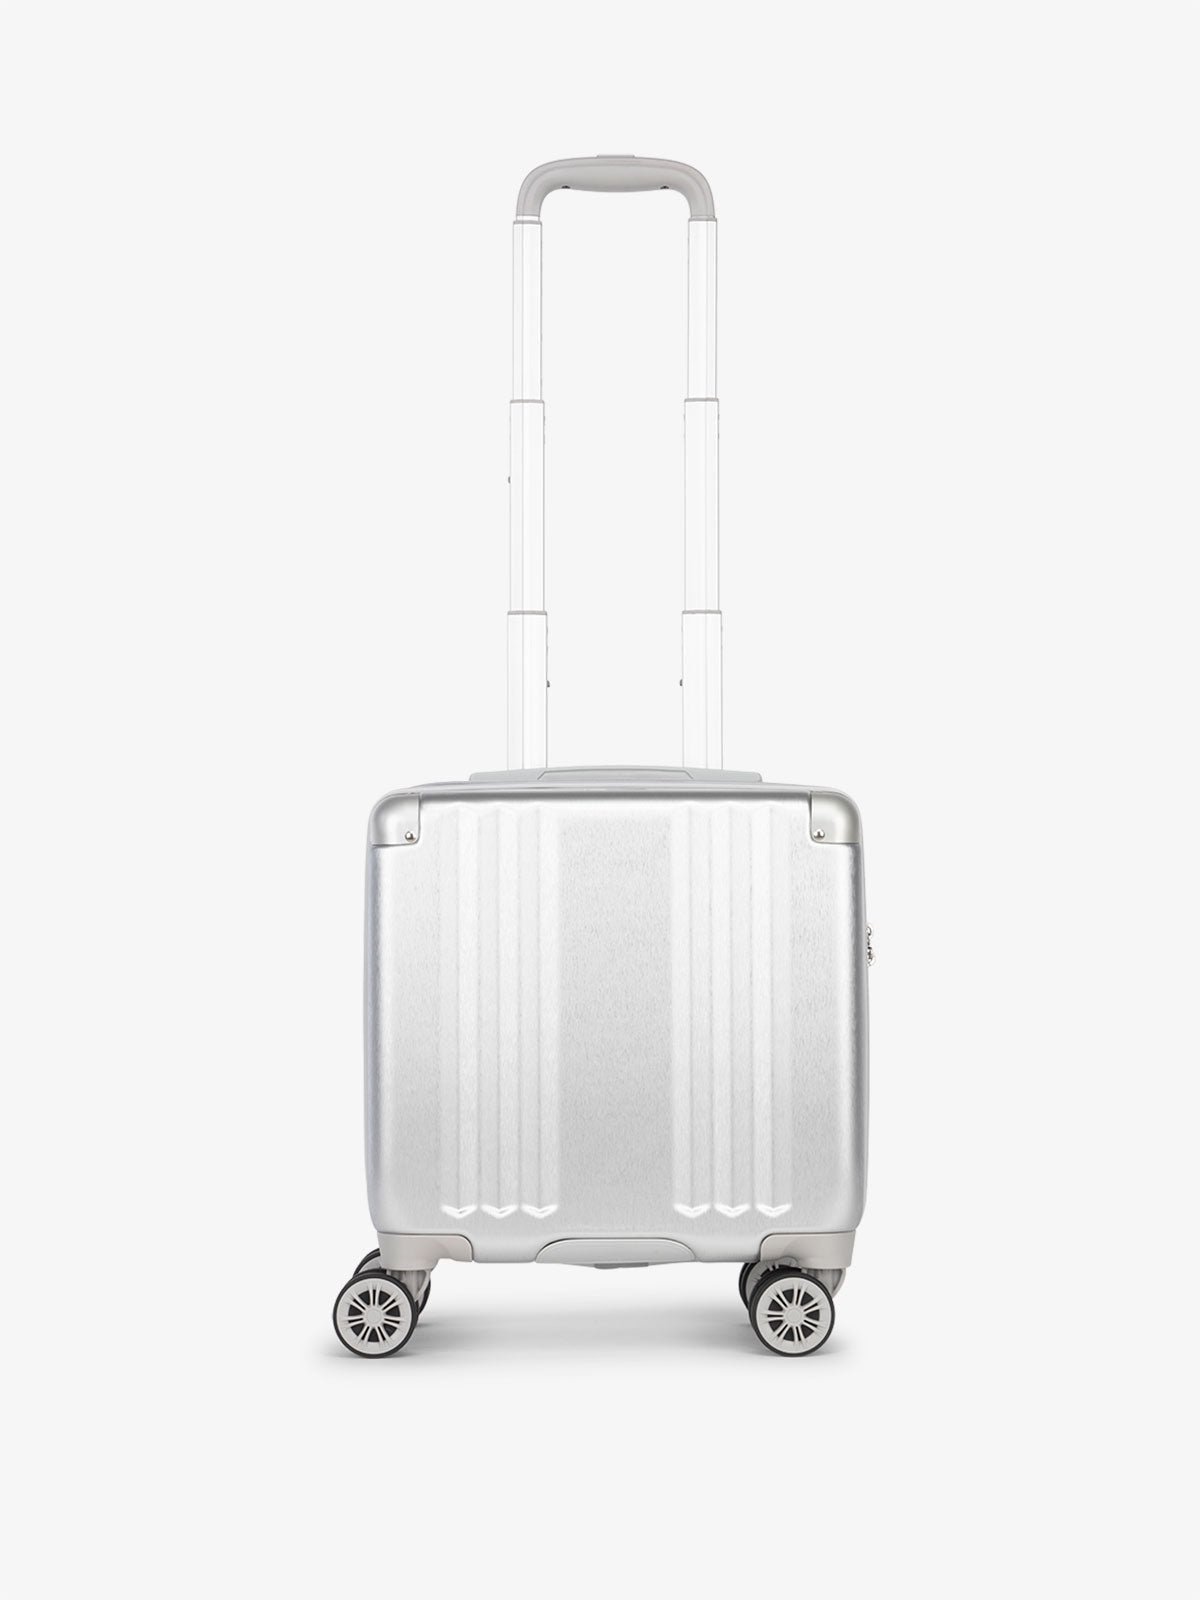 CALPAK Ambuer small carry on luggage with 360 spinner wheels in silver